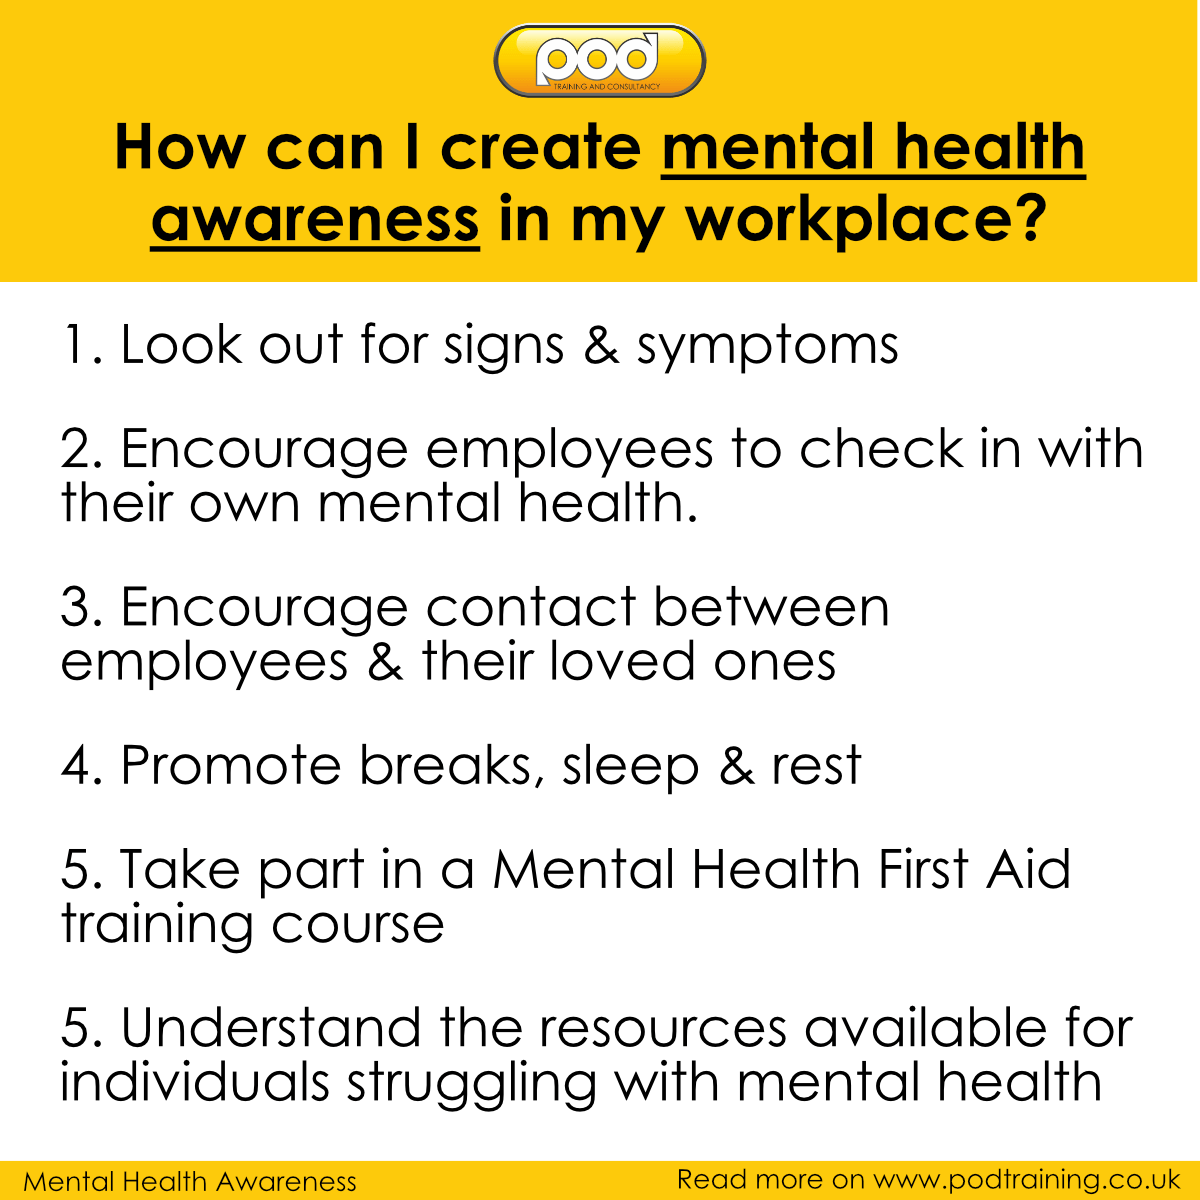 Creating Mental Health Awareness in the Workplace by POD Training